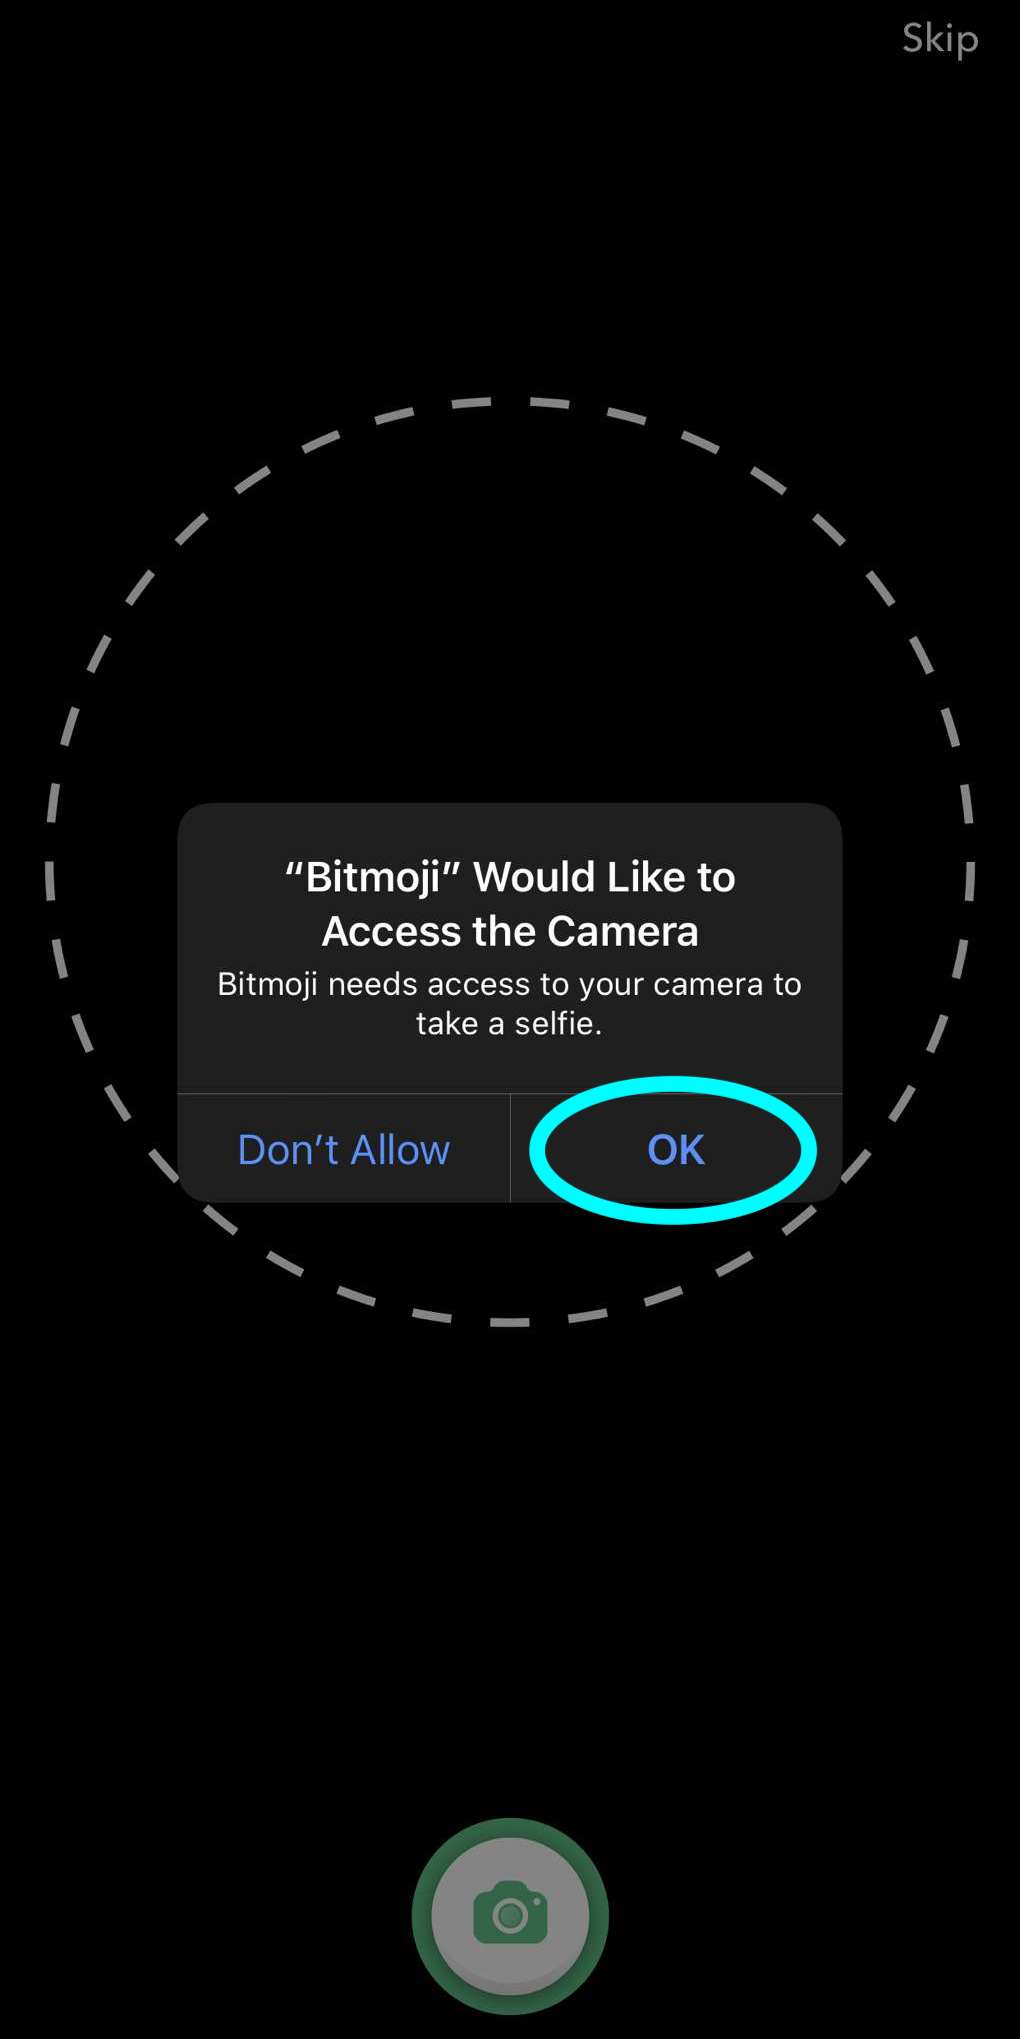 a pop up to allow Bitmoji access to camera, the OK button to allow access is highlighted